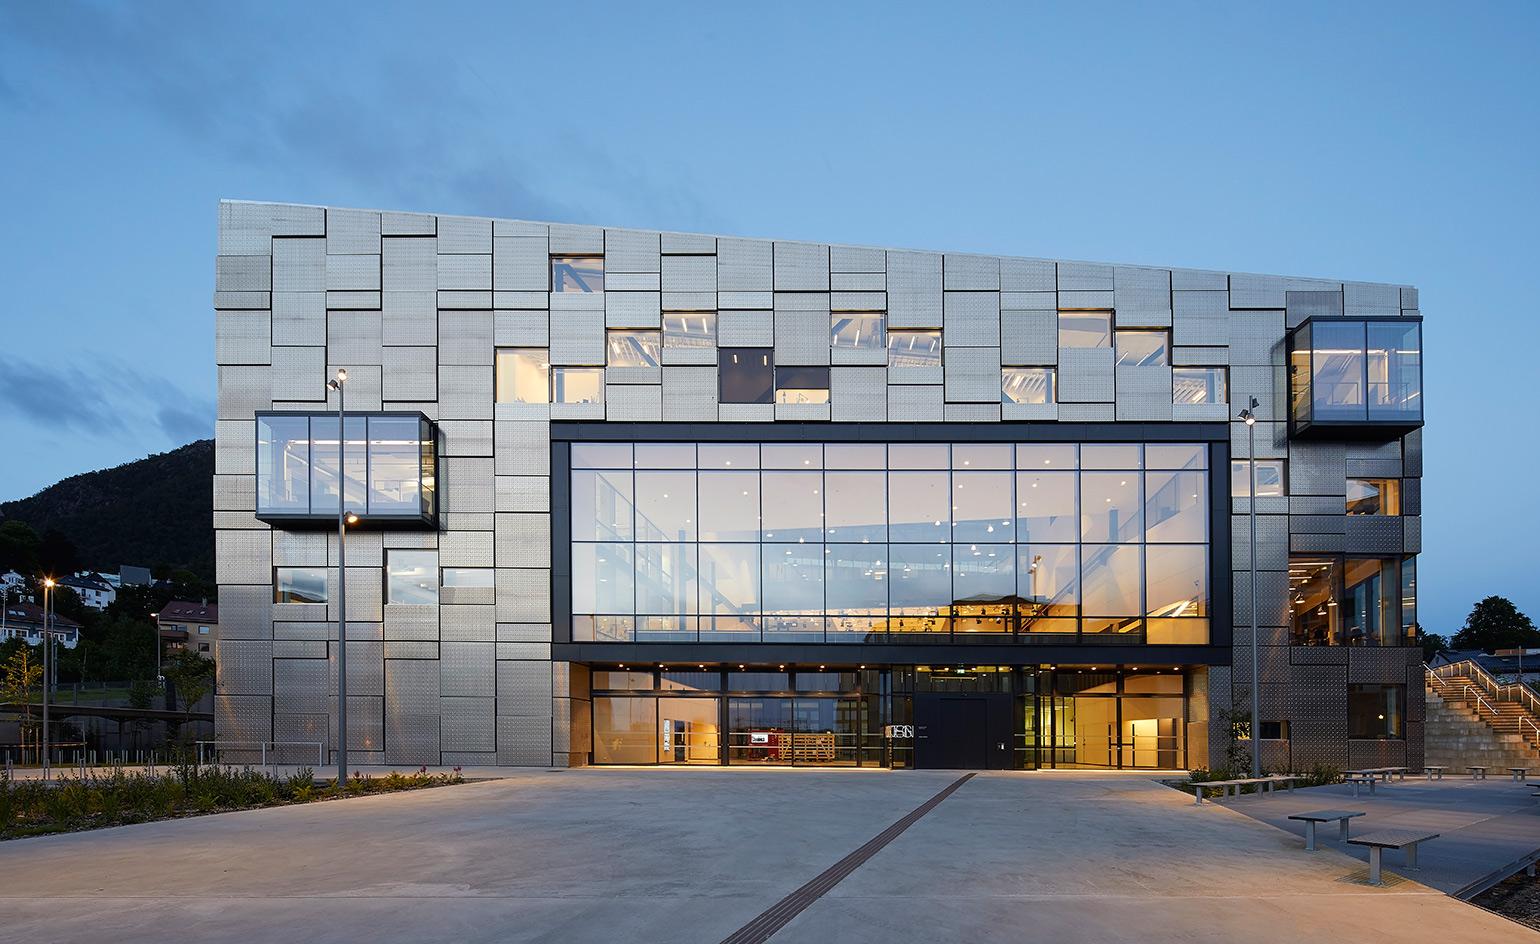 New university buildings are a lesson in architecture. Wallpaper*